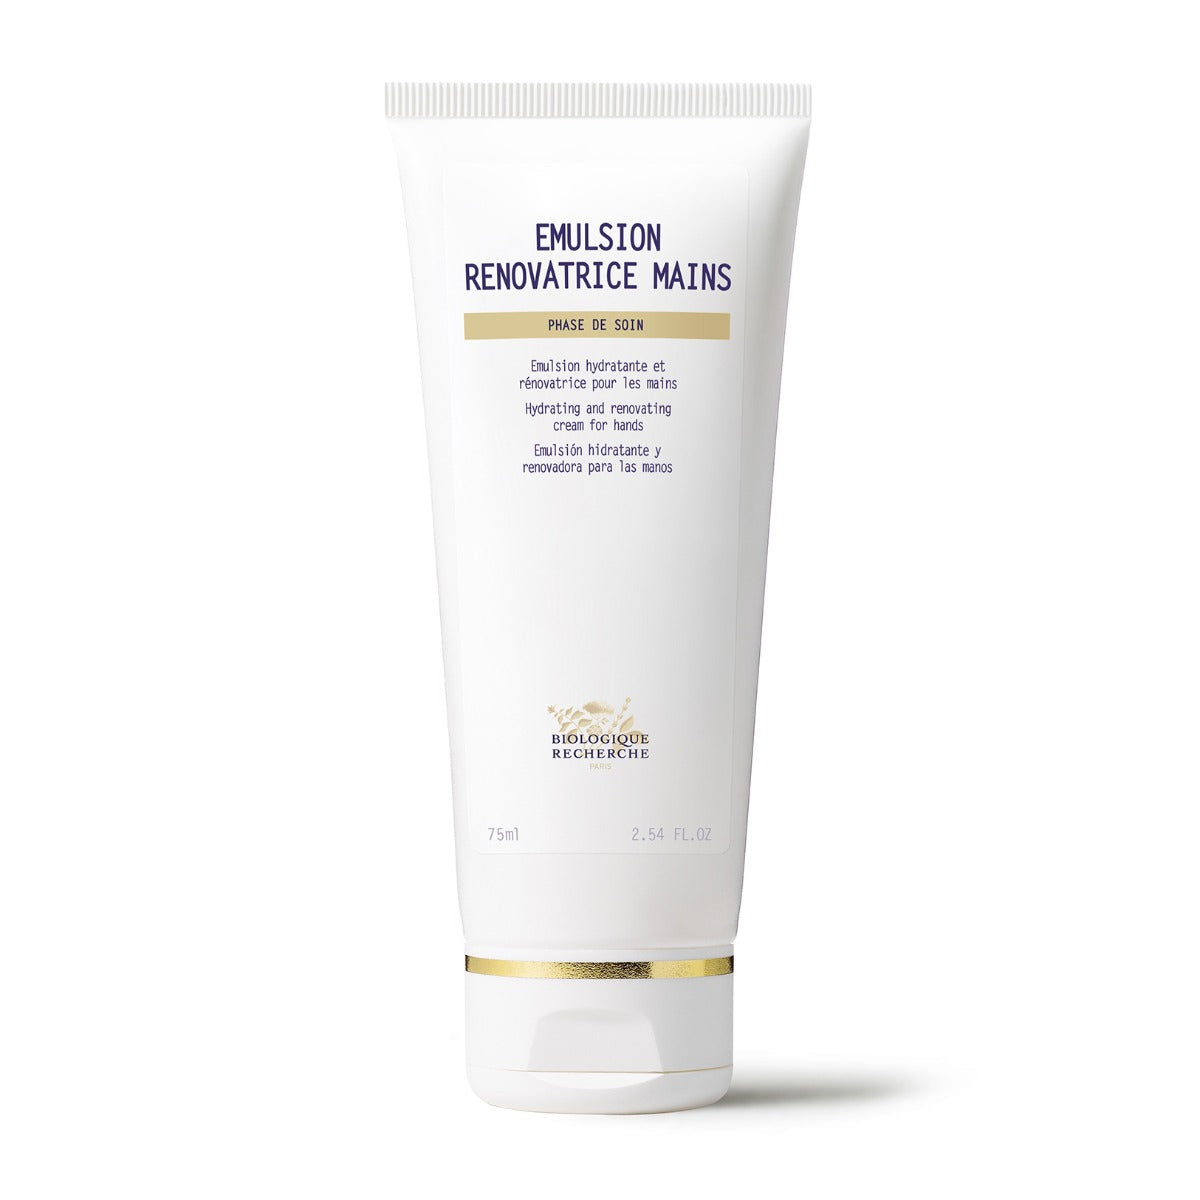 Emulsion Renovatrice Mains Protecting and Hydrating Cream